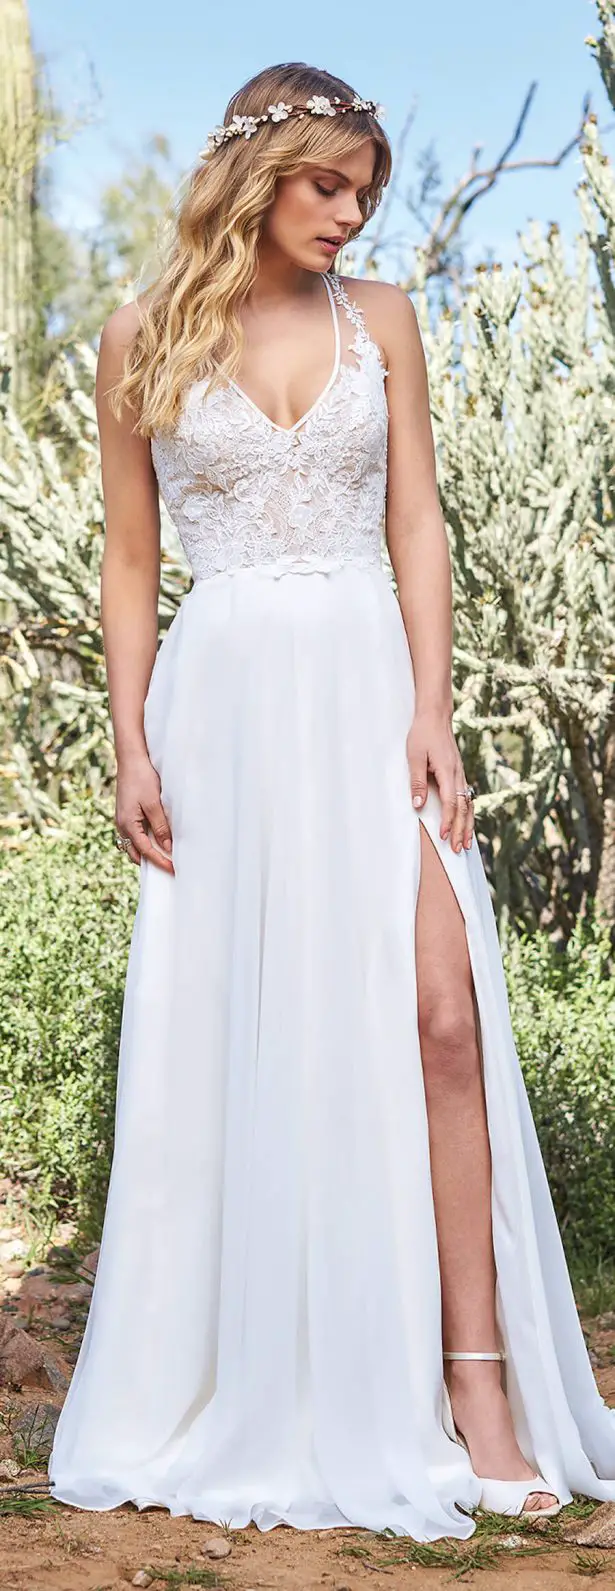 30 Bohemian Wedding Dresses That Will Take Your Breath Away